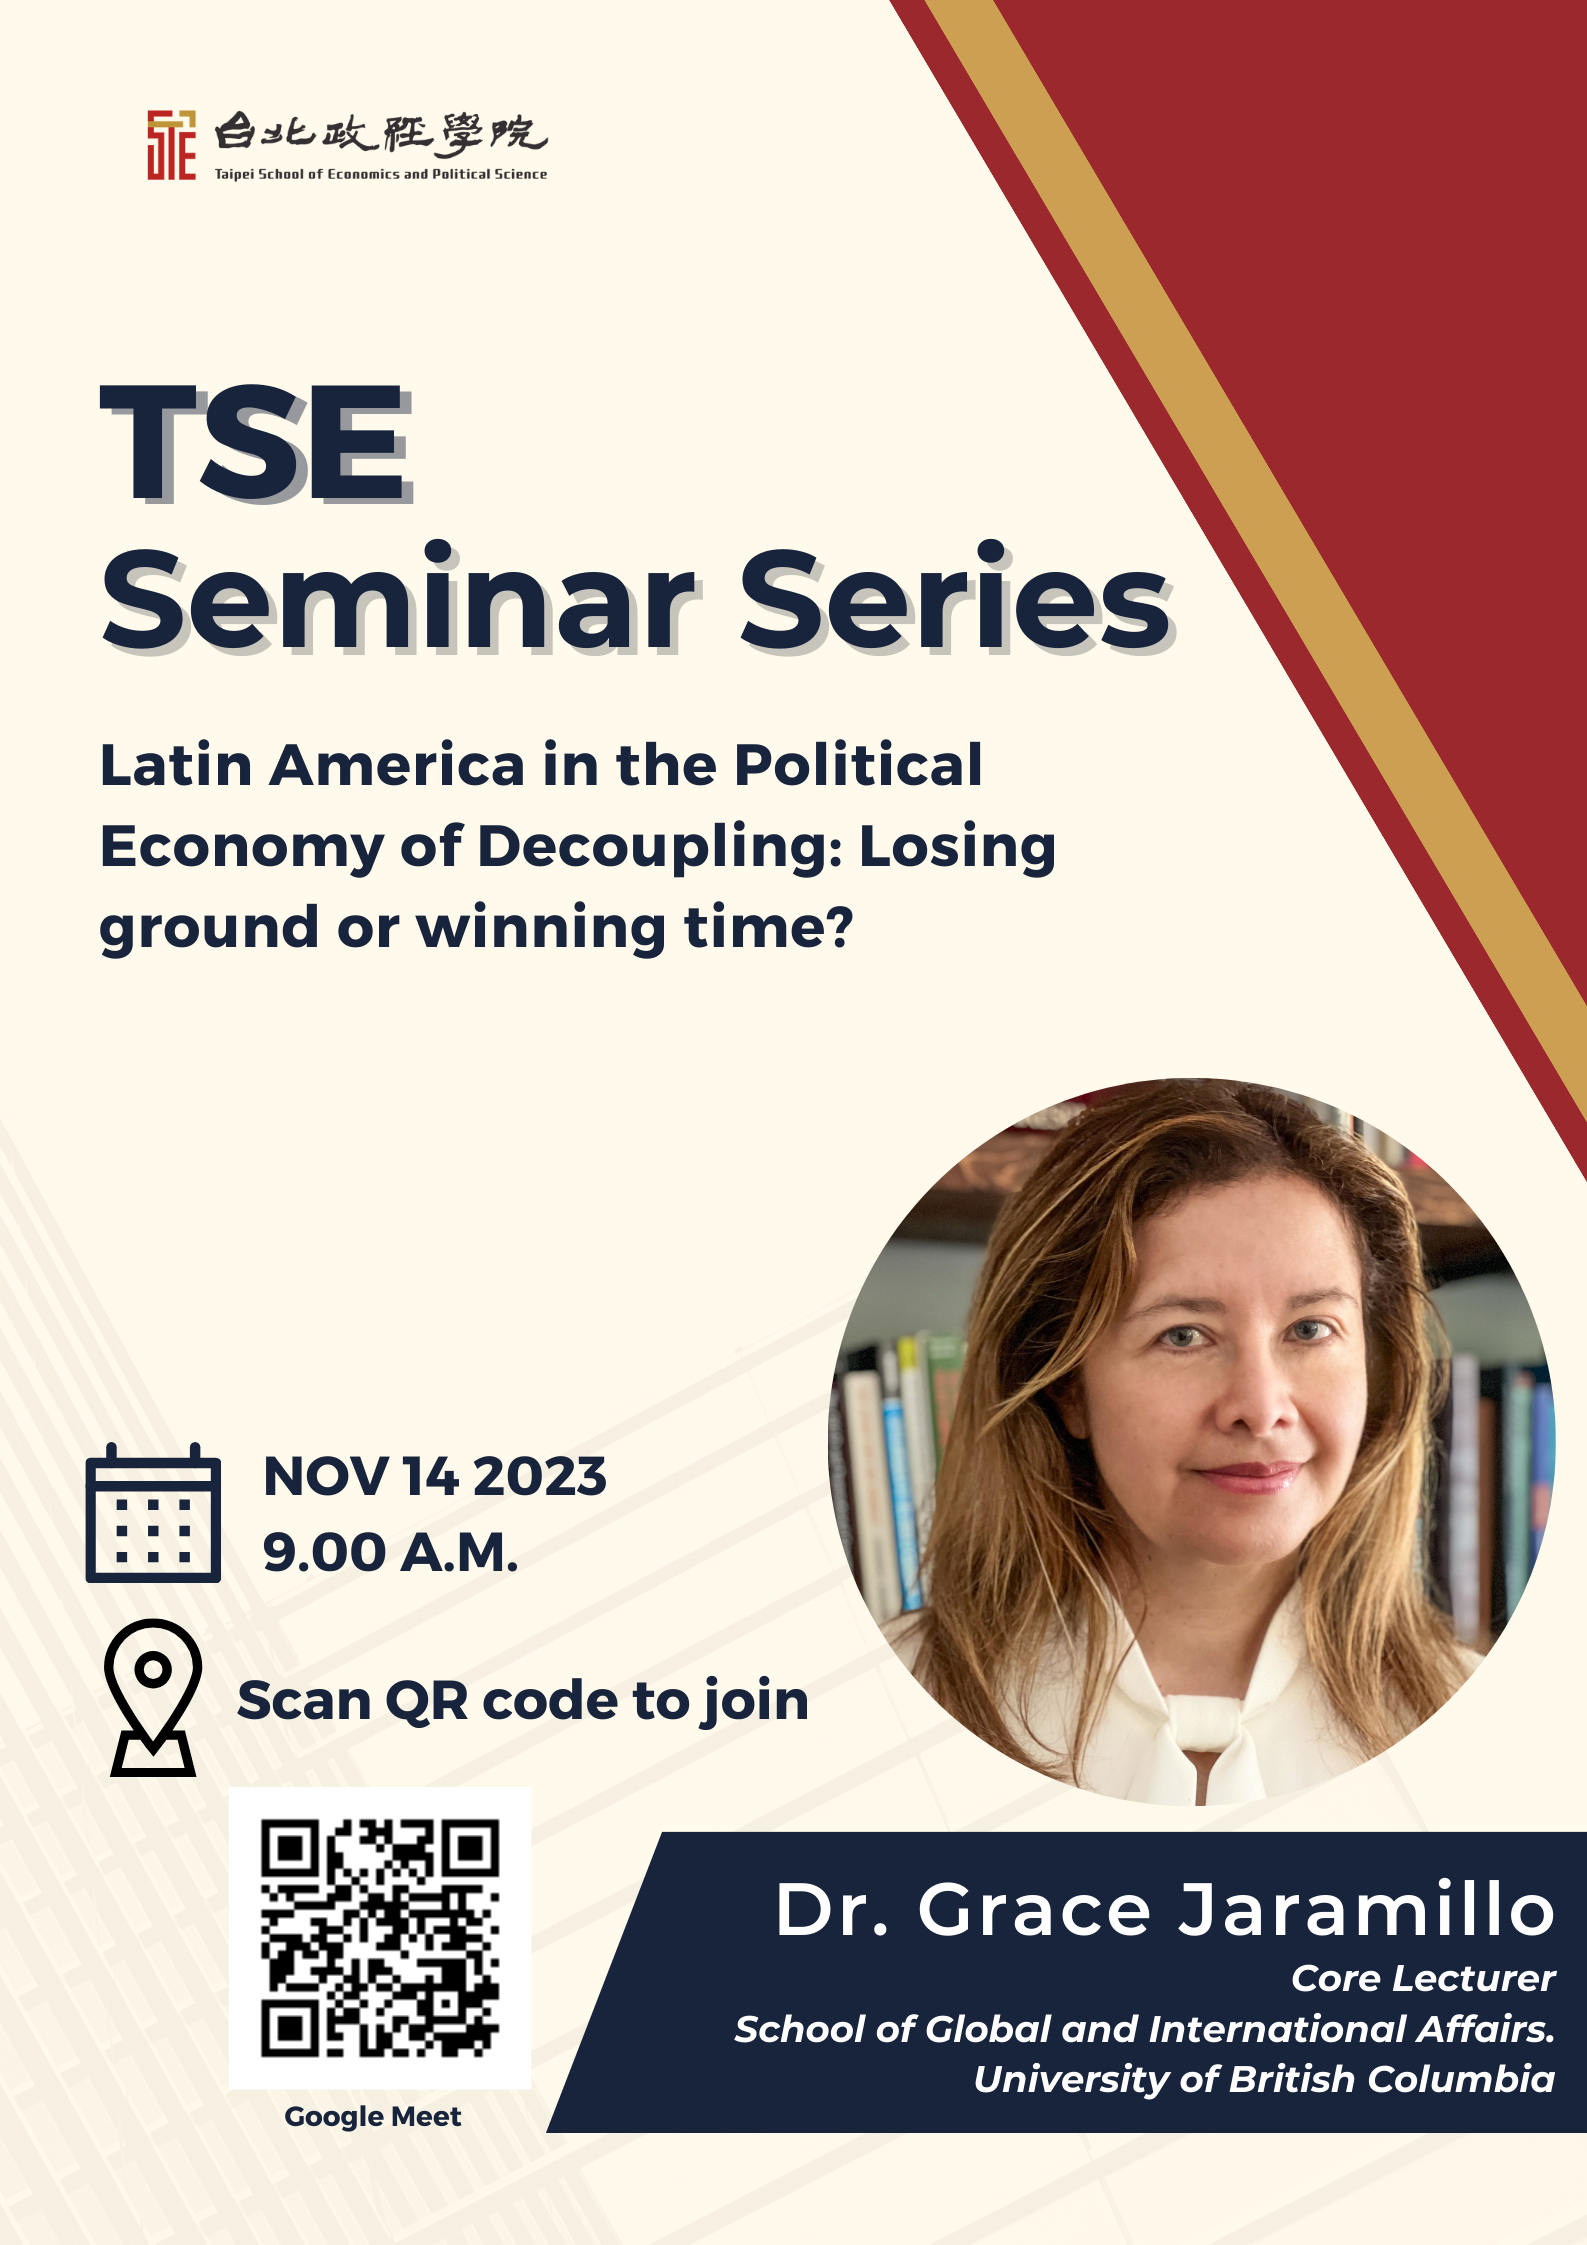 Fall 2023 Seminar Series No. 5 | Latin America in the Political Economy of Decoupling: Losing ground or winning time?